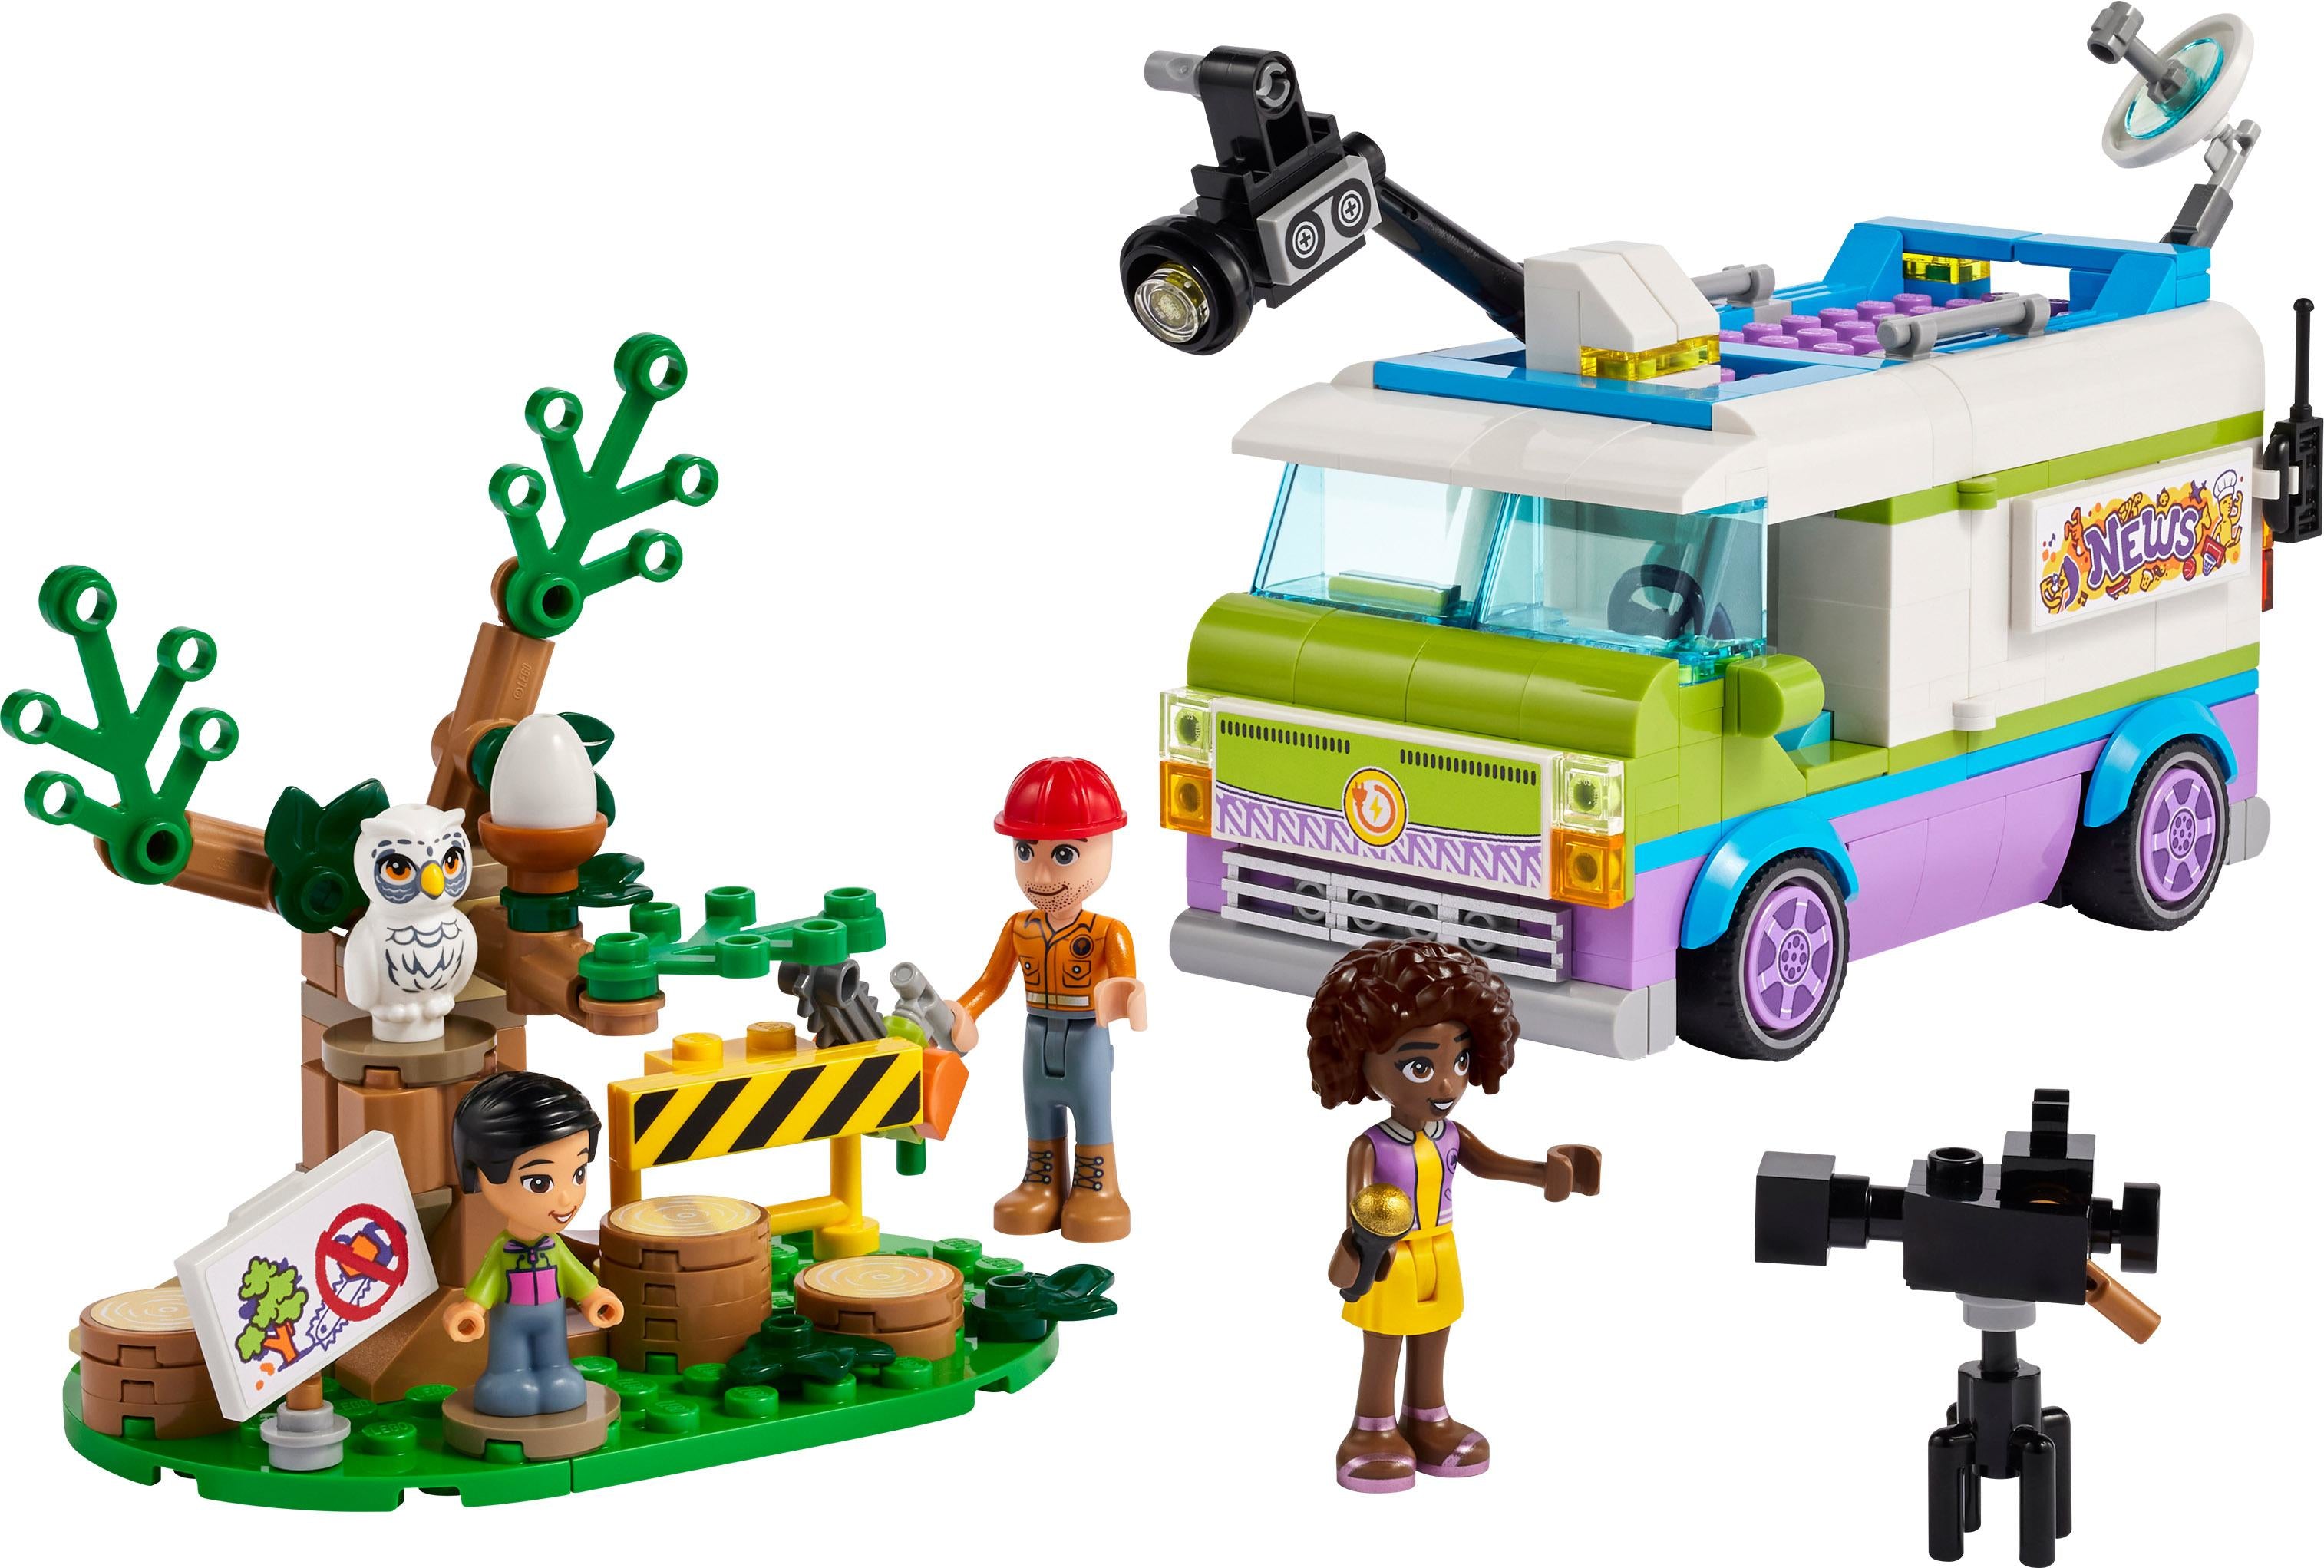 LEGO 41749 Friends Newsroom Van, Animal Rescue Playset, Pretend to Film and Report News with Toy Truck, Owl Figure and Aliya Mini-Doll, Gift for Girls, Boys and Kids 6 Plus Years Old